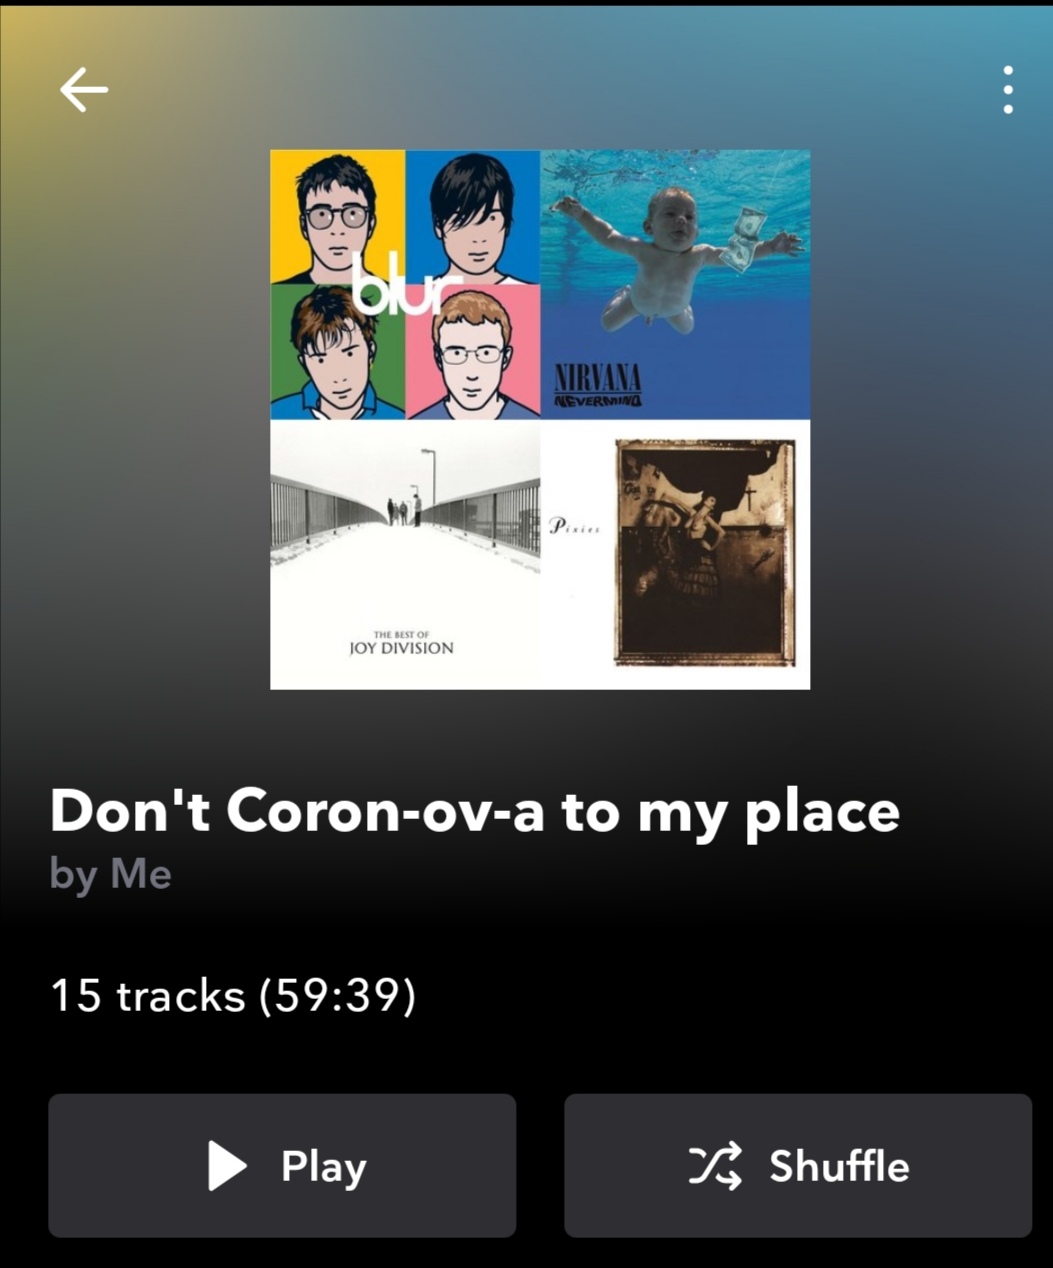 PLAYLIST: Don't Coron-ov-a to my place